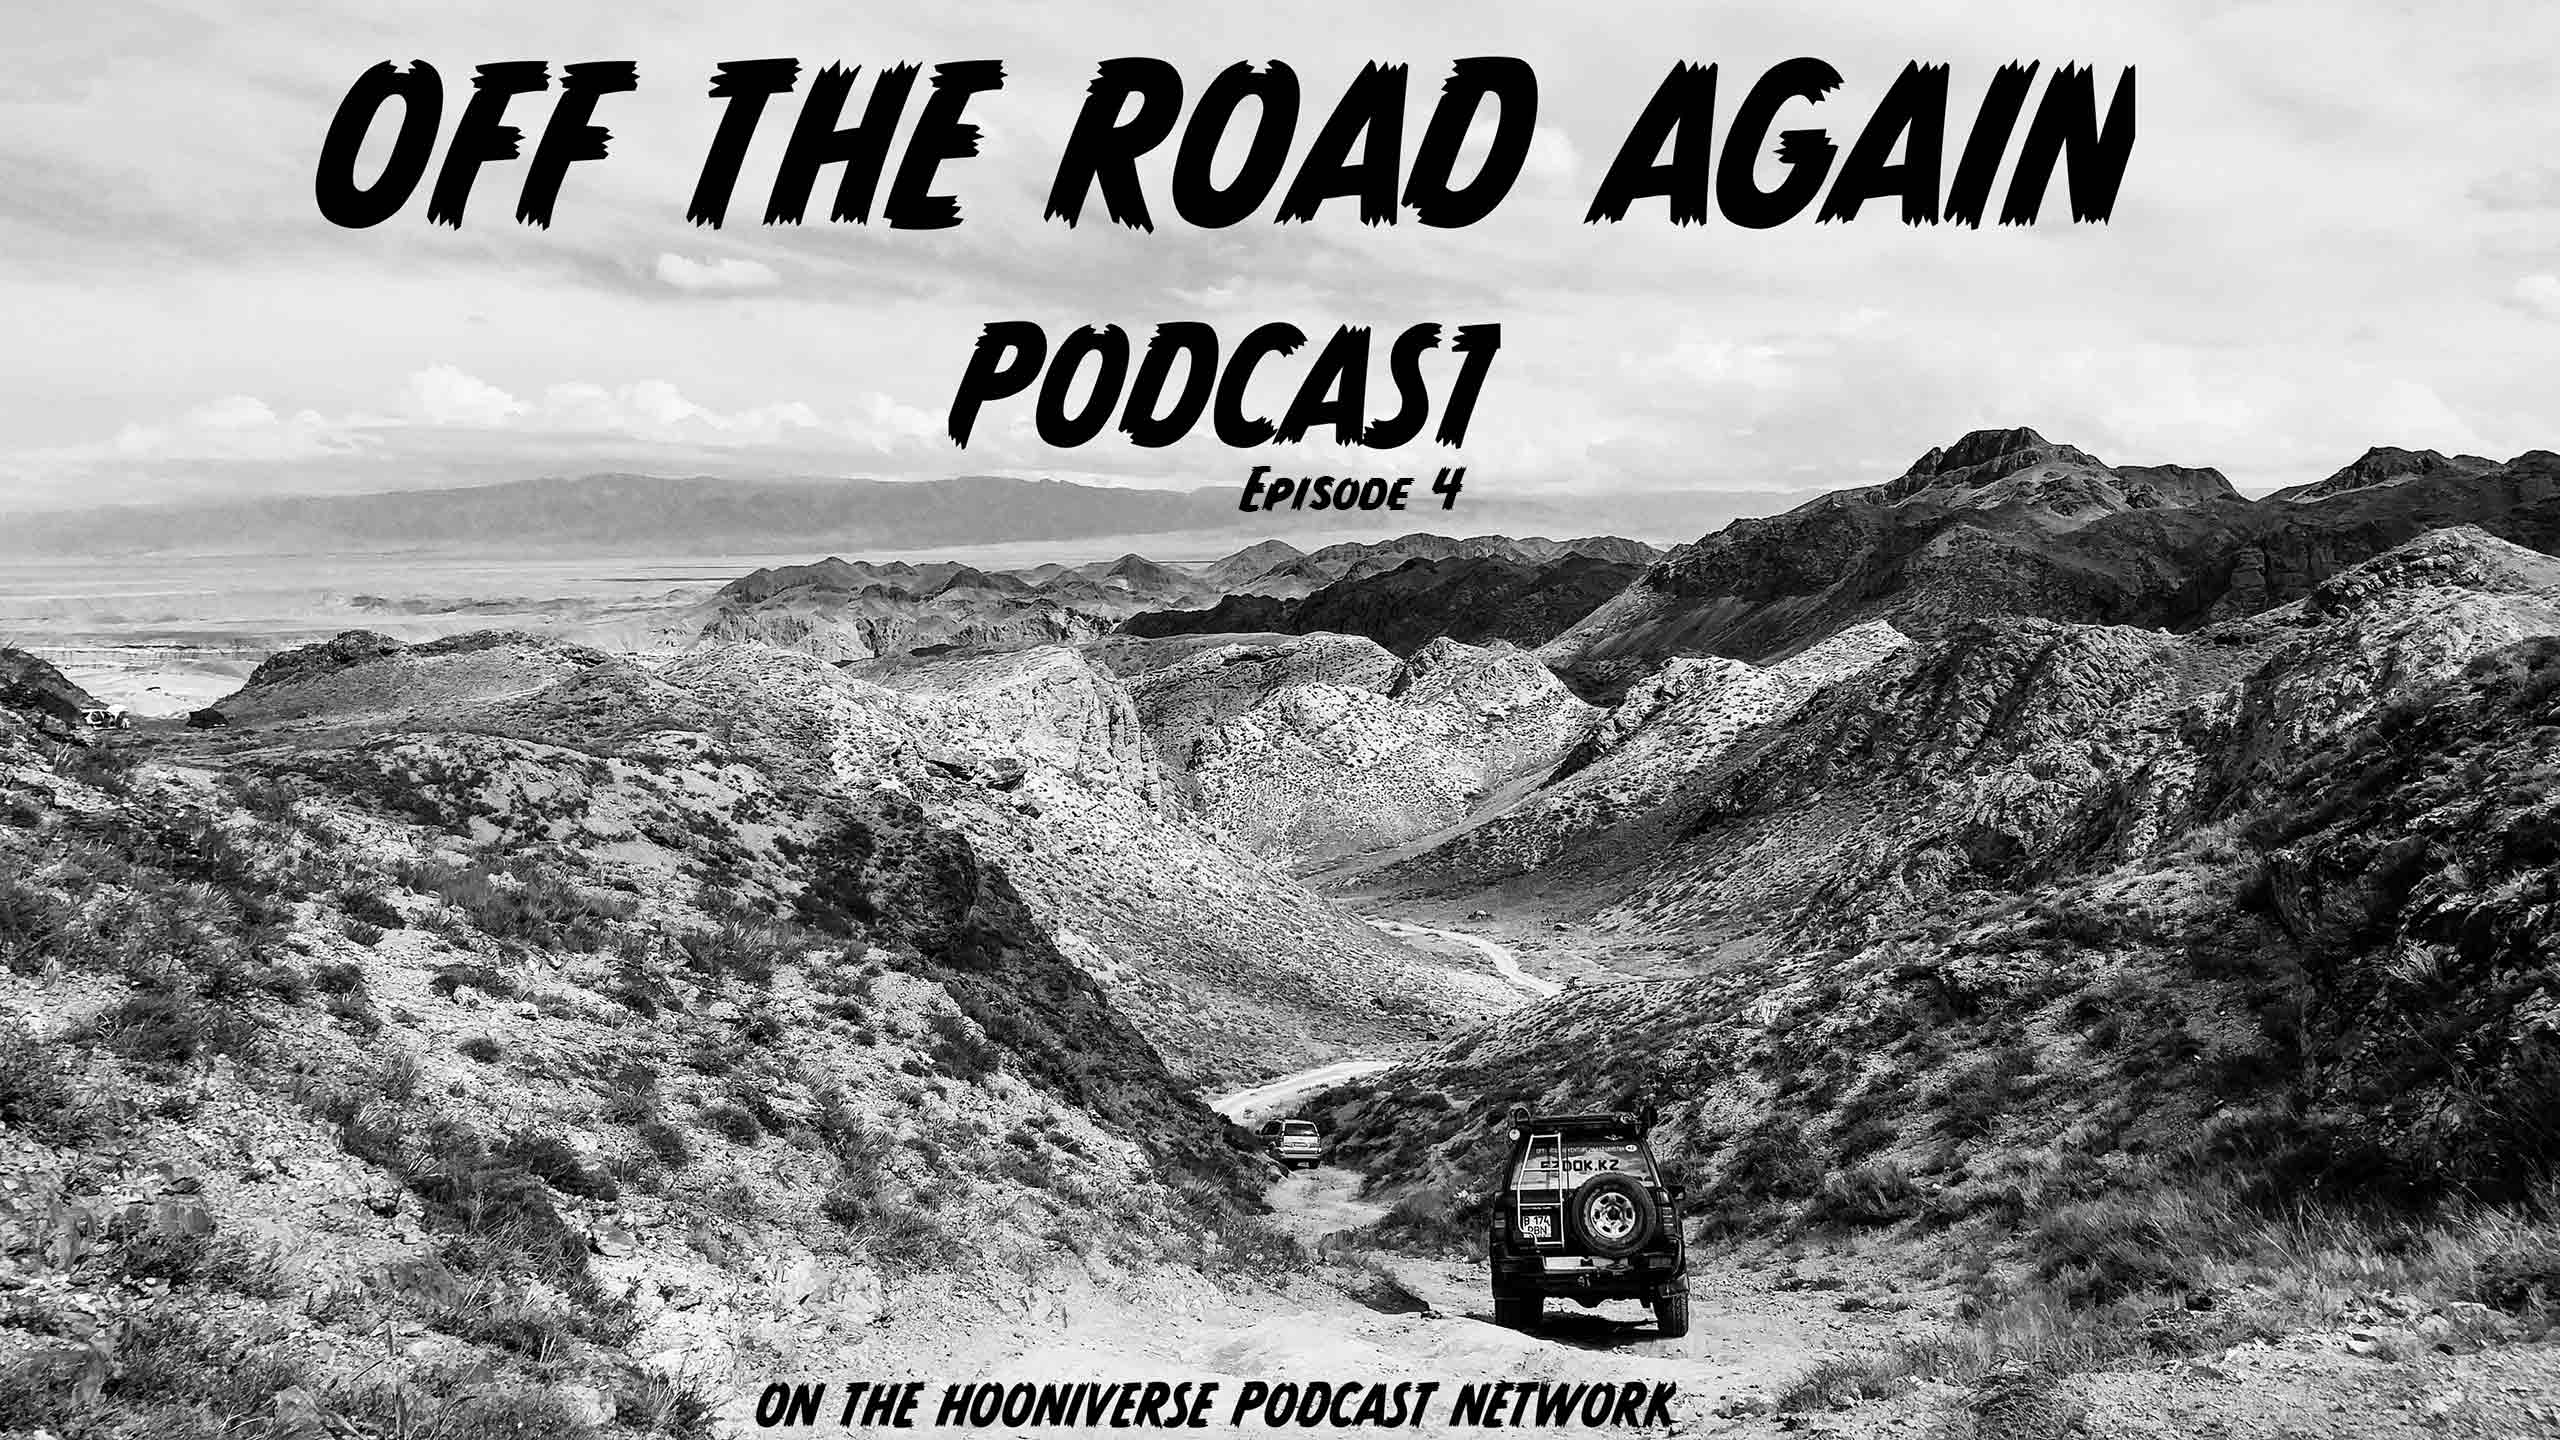 Off the Road Again Podcast: Episode 4 - Mogs & Buses